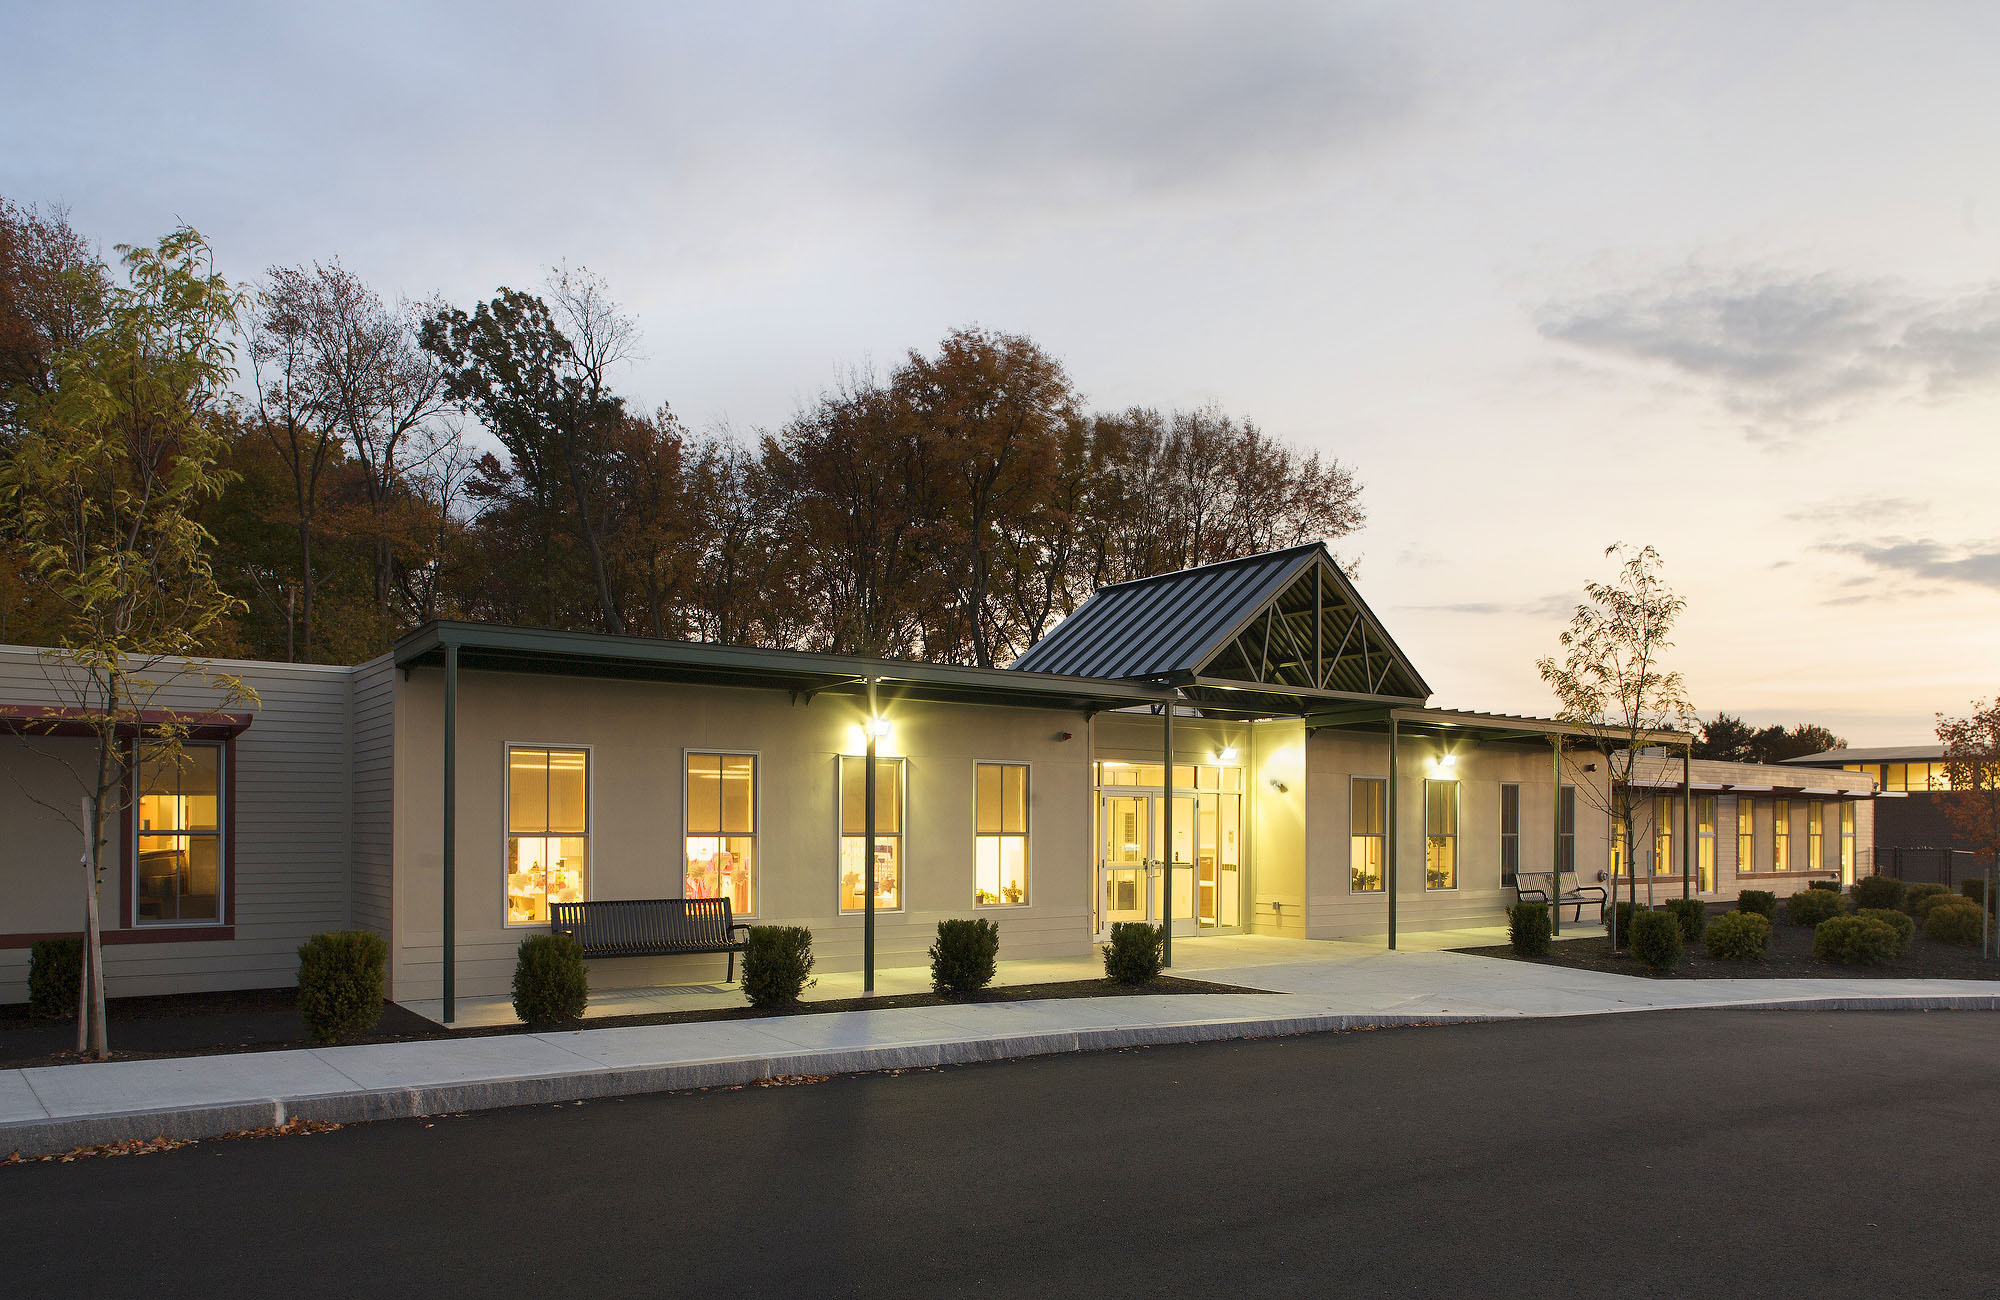 The North Andover Early Childcare Center using modular buildings.